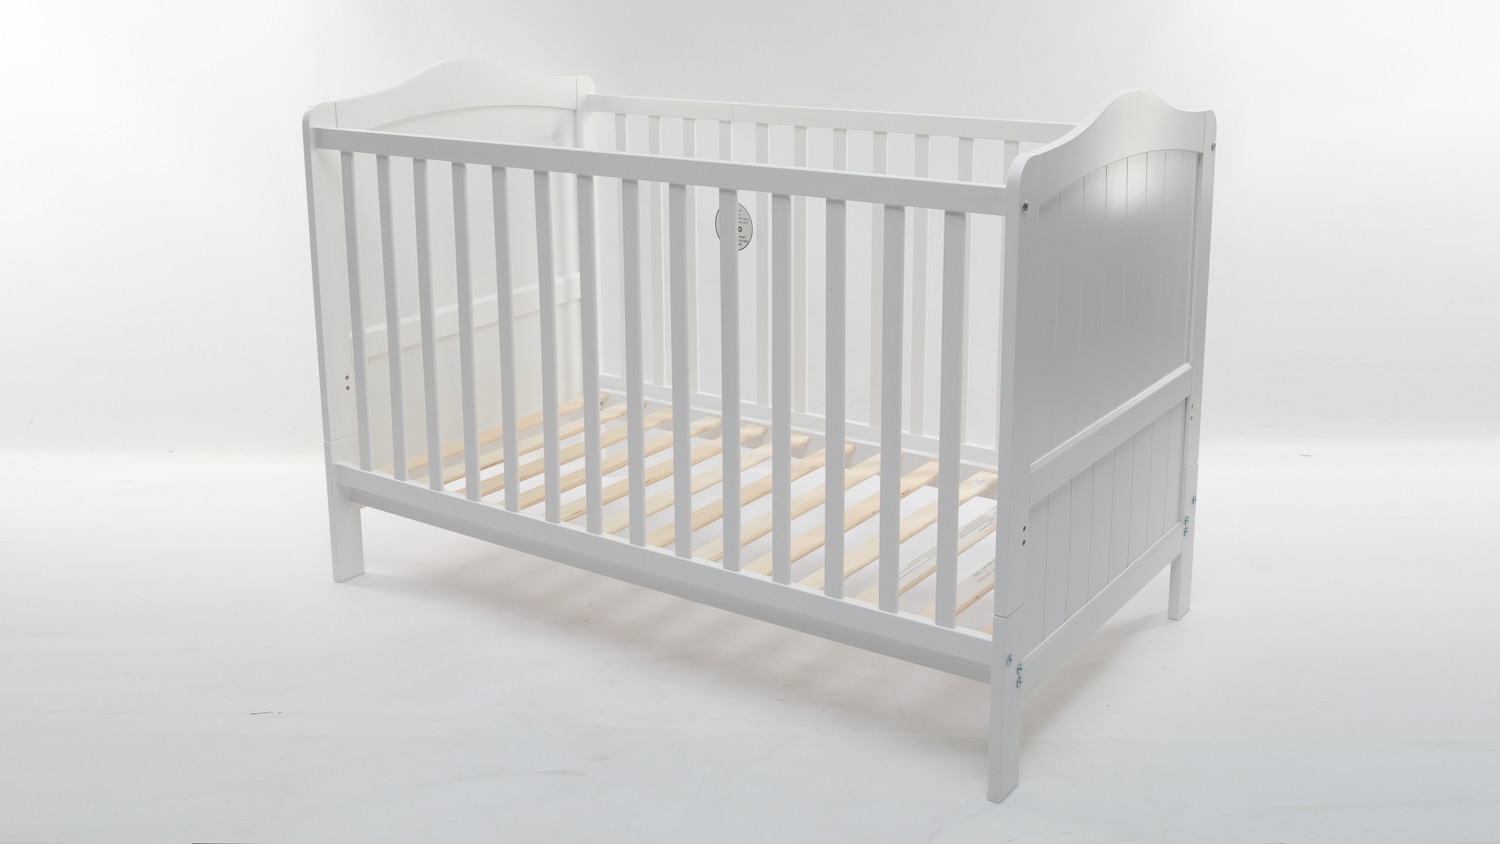 Kmart Anko 2-in-1 Wooden Cot carousel image